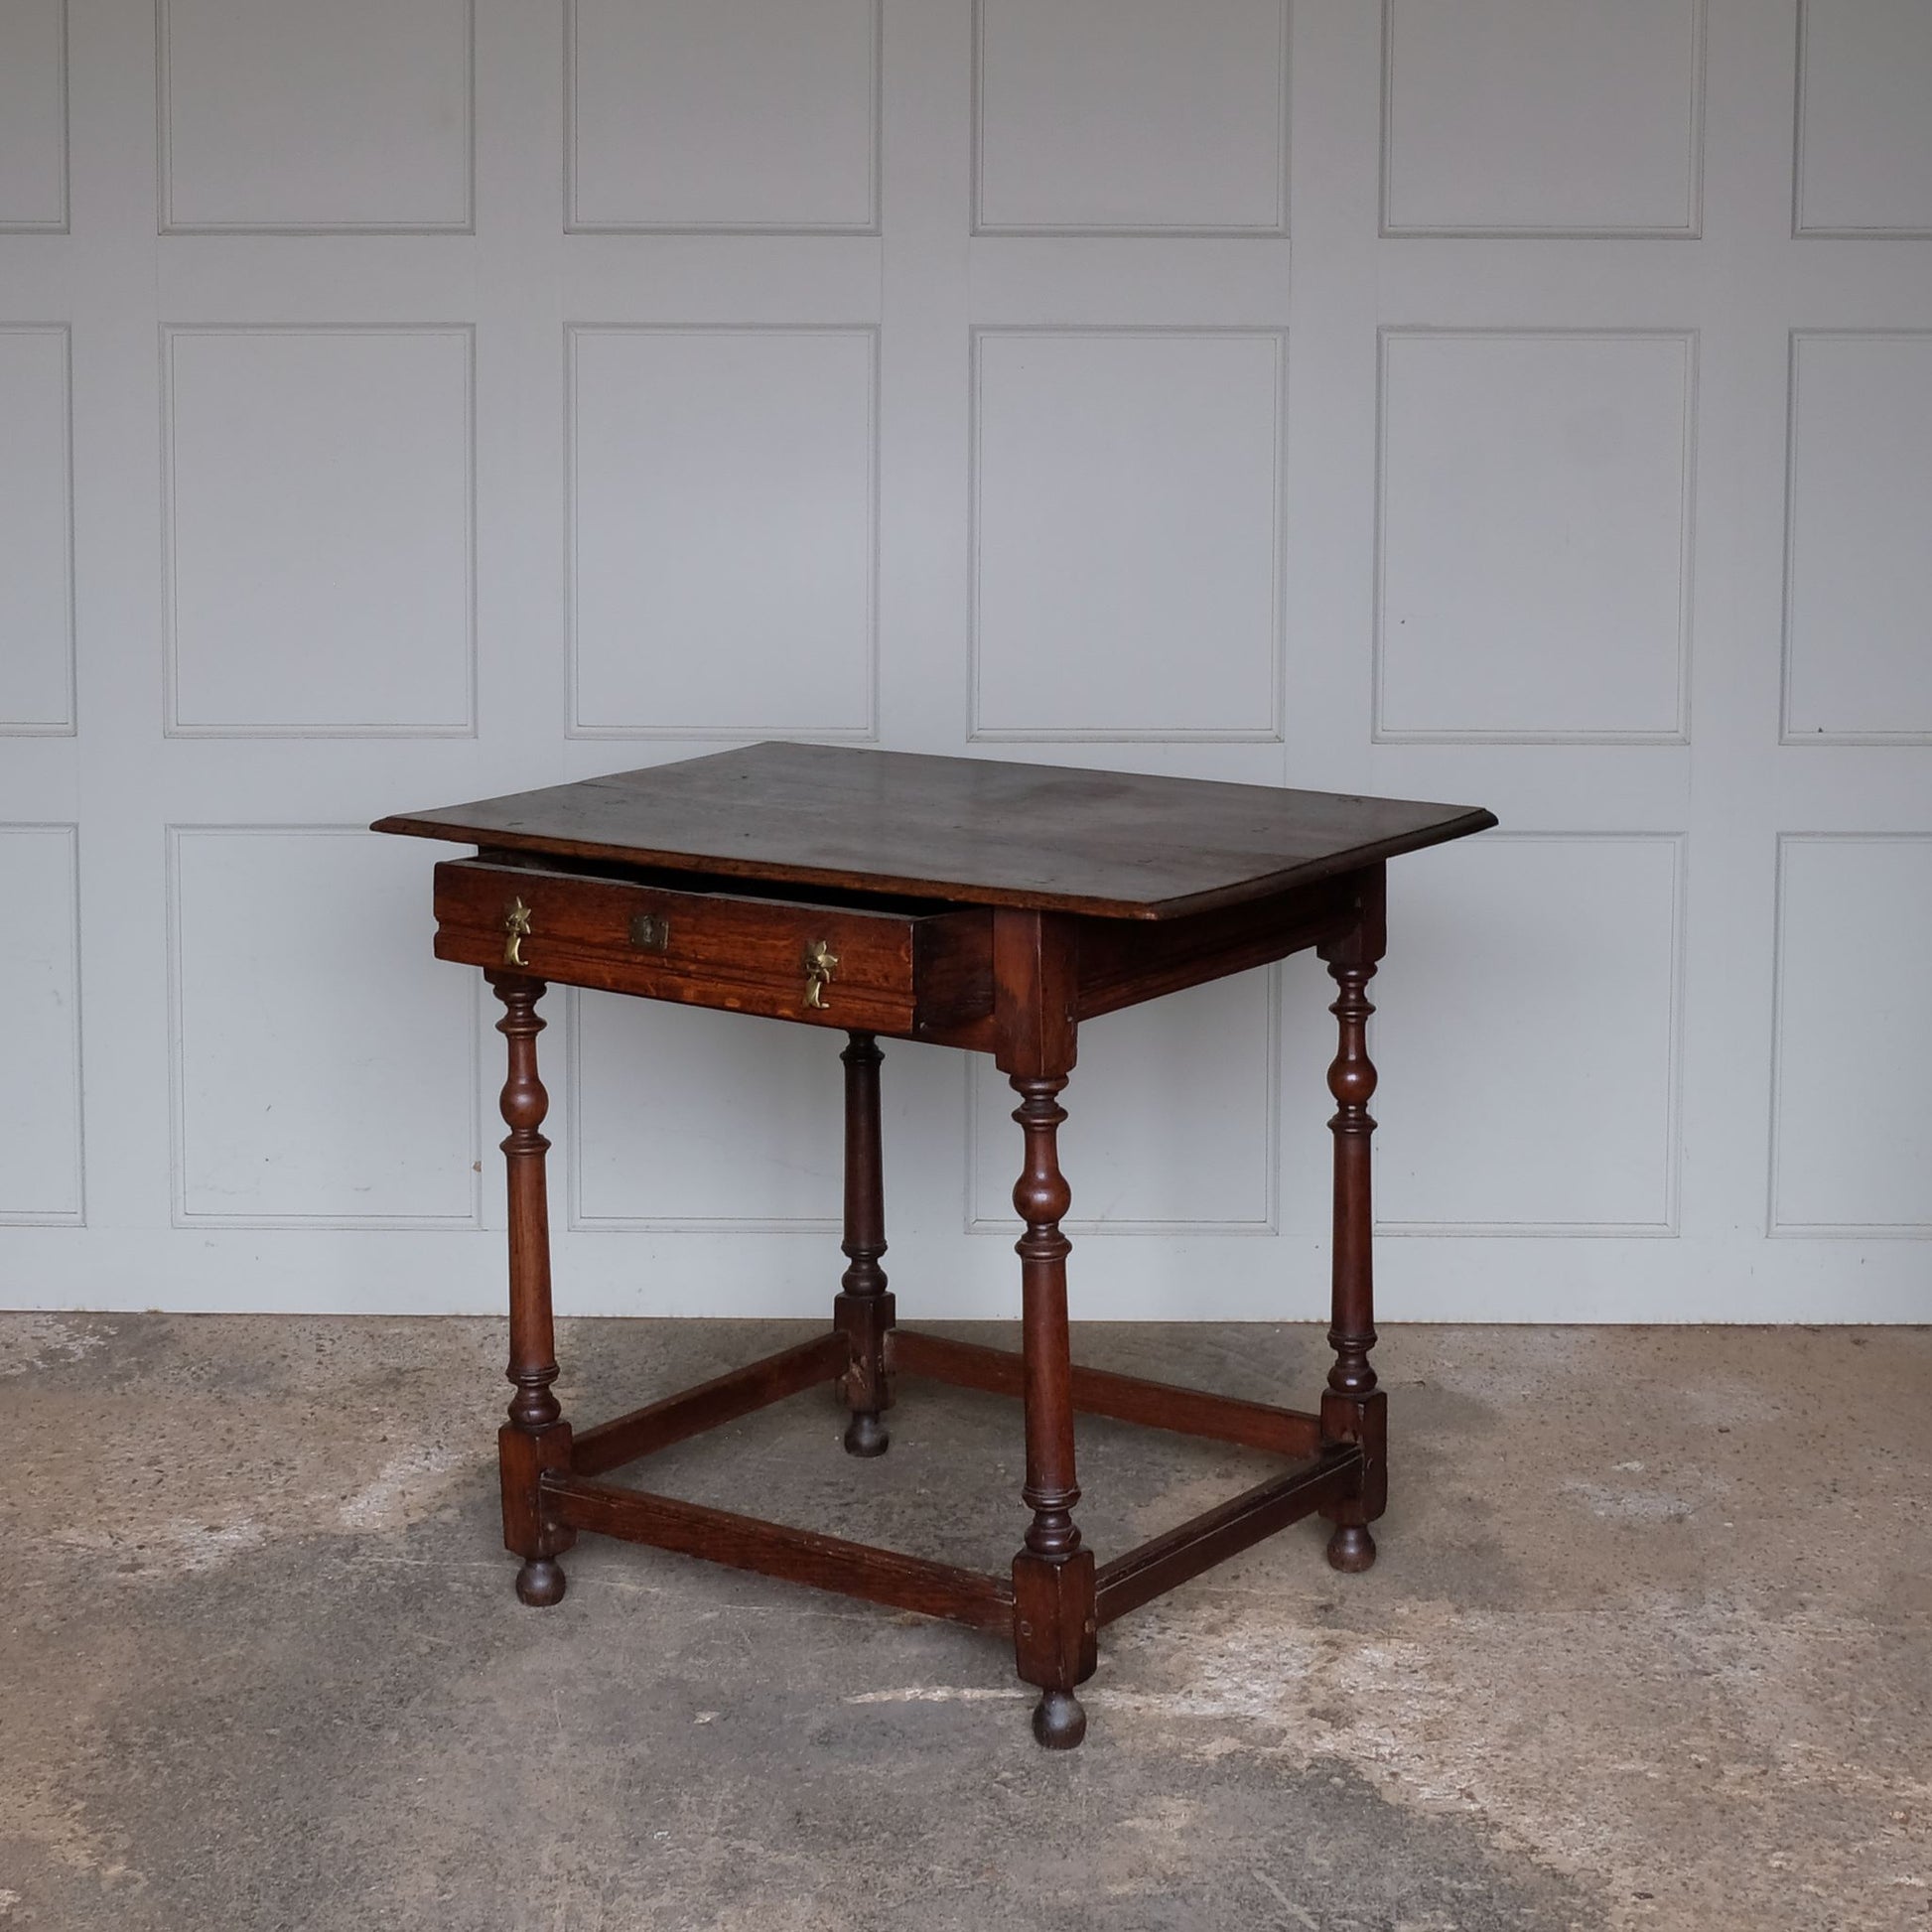 A fine 17th century English oak side table with a lovely well-patinated two plank moulded top with with flying overhangs above a single drawer over tapered and ring-turned legs joined by box stretchers. A very useful size for use in either a living room, small hallway or as an elegant bedside table.